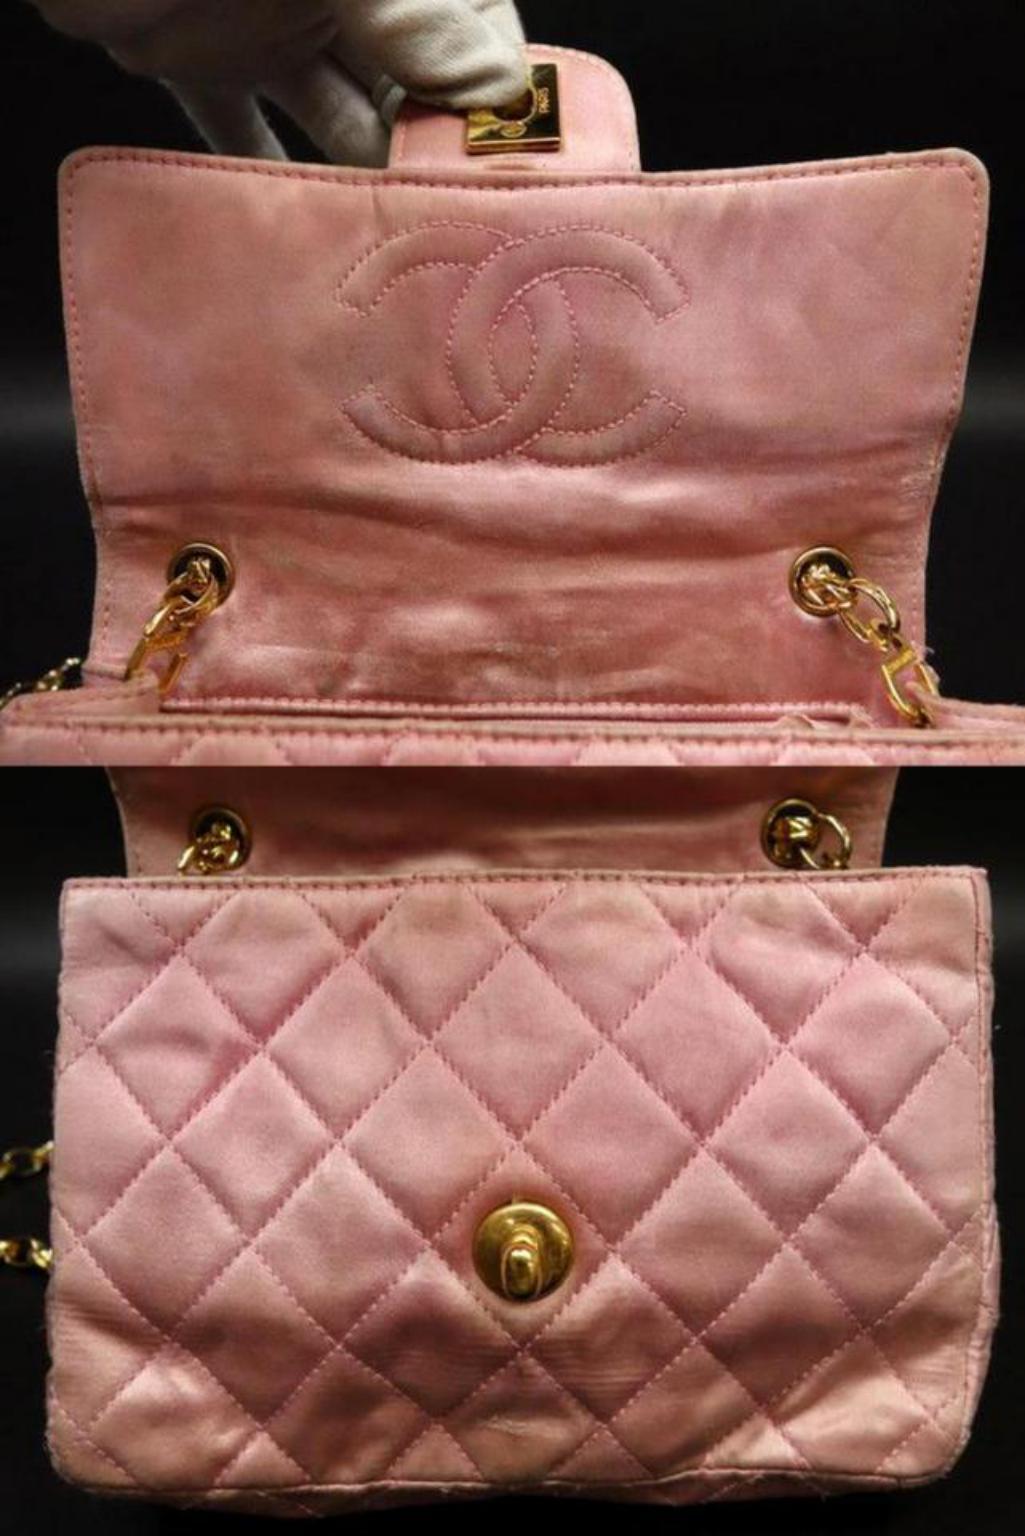 Women's Chanel Quilted Mini Square Flap 224669 Pink Satin Shoulder Bag